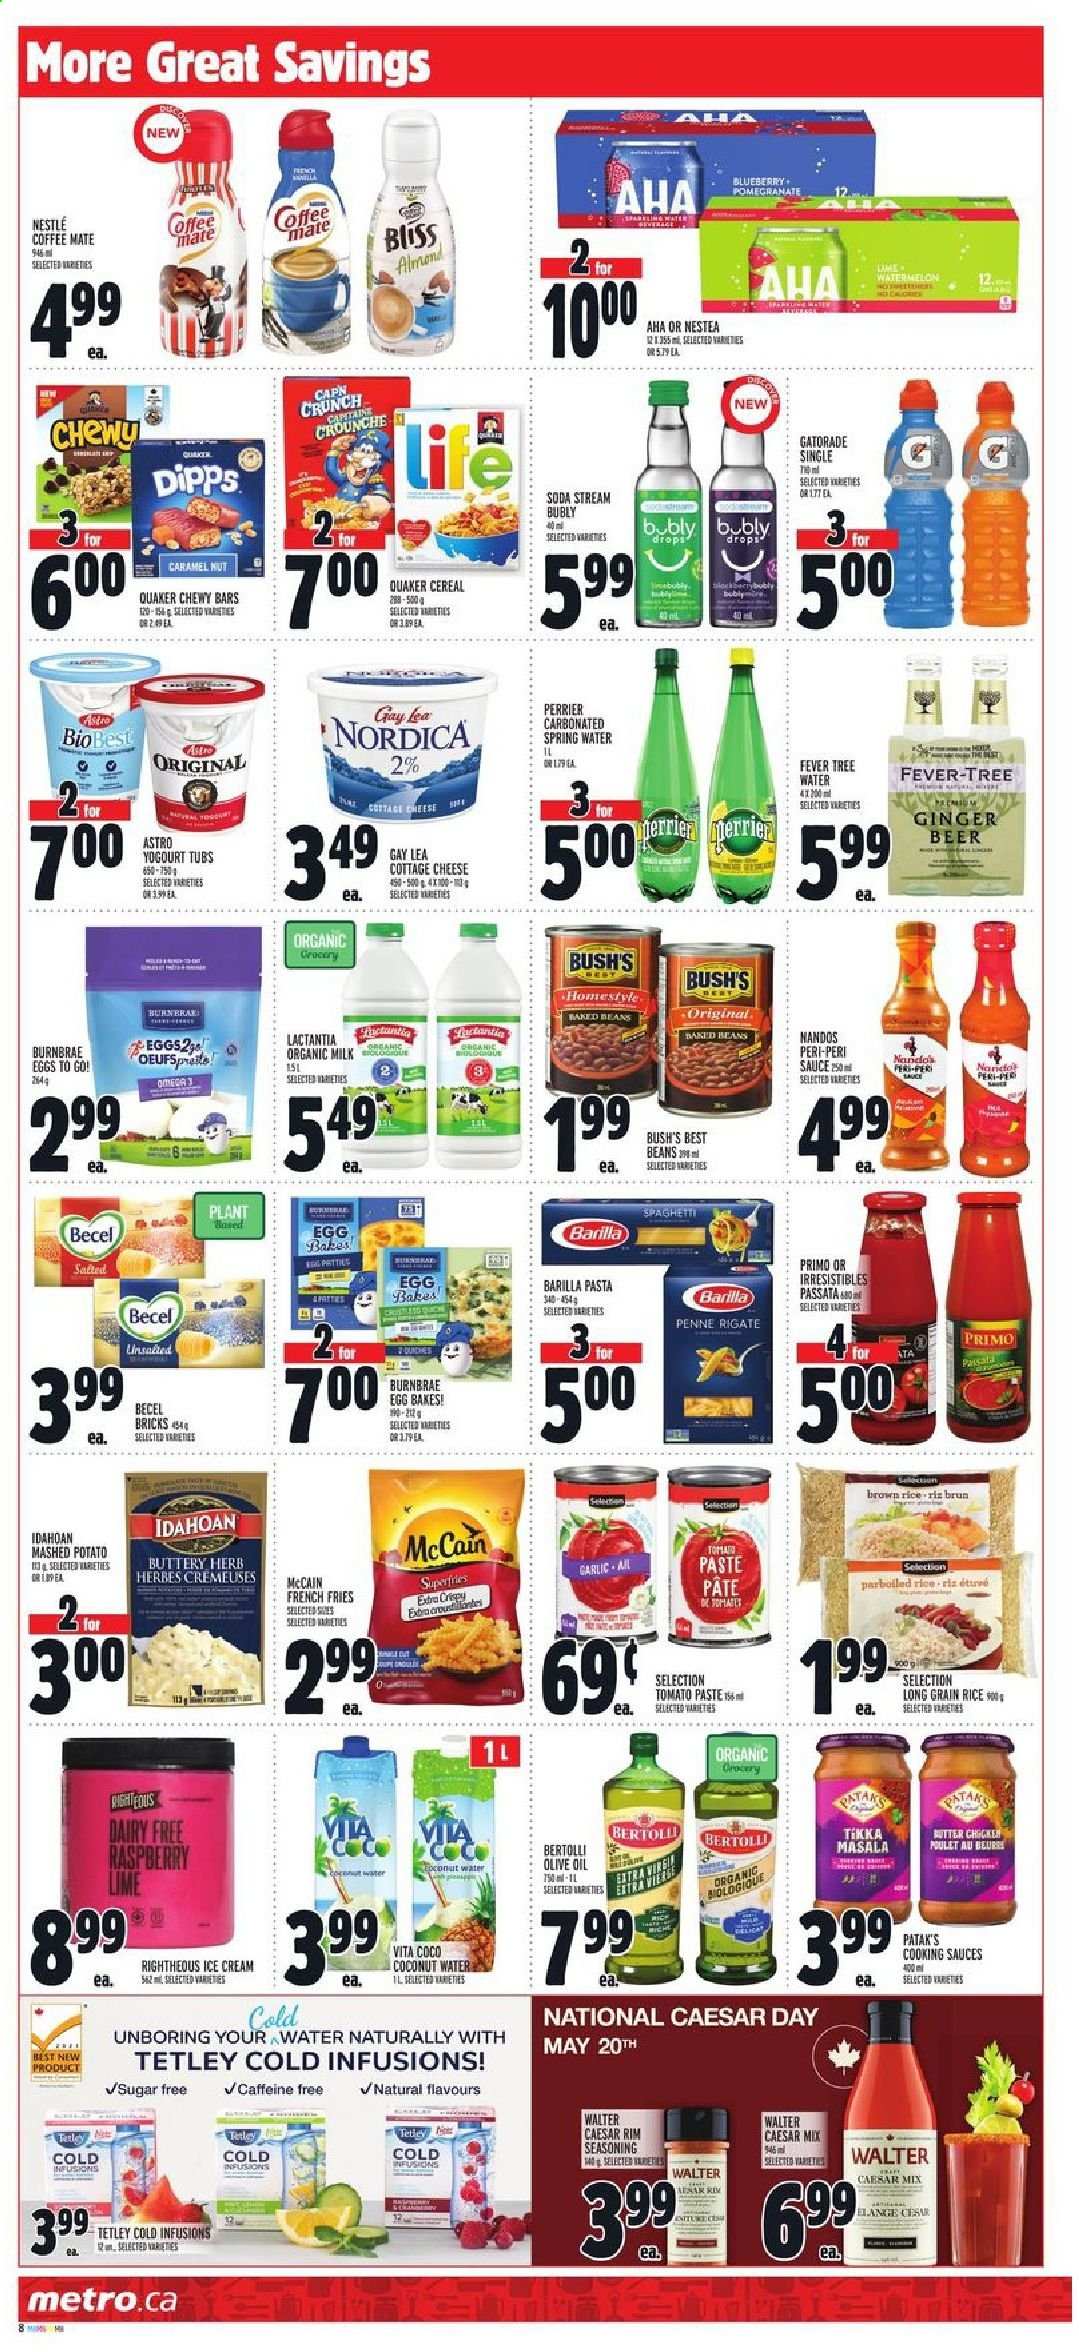 thumbnail - Metro Flyer - May 20, 2021 - May 26, 2021 - Sales products - garlic, watermelon, pomegranate, pasta, Barilla, Quaker, Tikka Masala, Bertolli, cottage cheese, cheese, Coffee-Mate, organic milk, eggs, ice cream, McCain, potato fries, french fries, tomato paste, cereals, brown rice, rice, penne, long grain rice, spice, herbs, caramel, olive oil, oil, coconut water, Perrier, Gatorade, spring water, beer, Nestlé, ginger beer. Page 8.